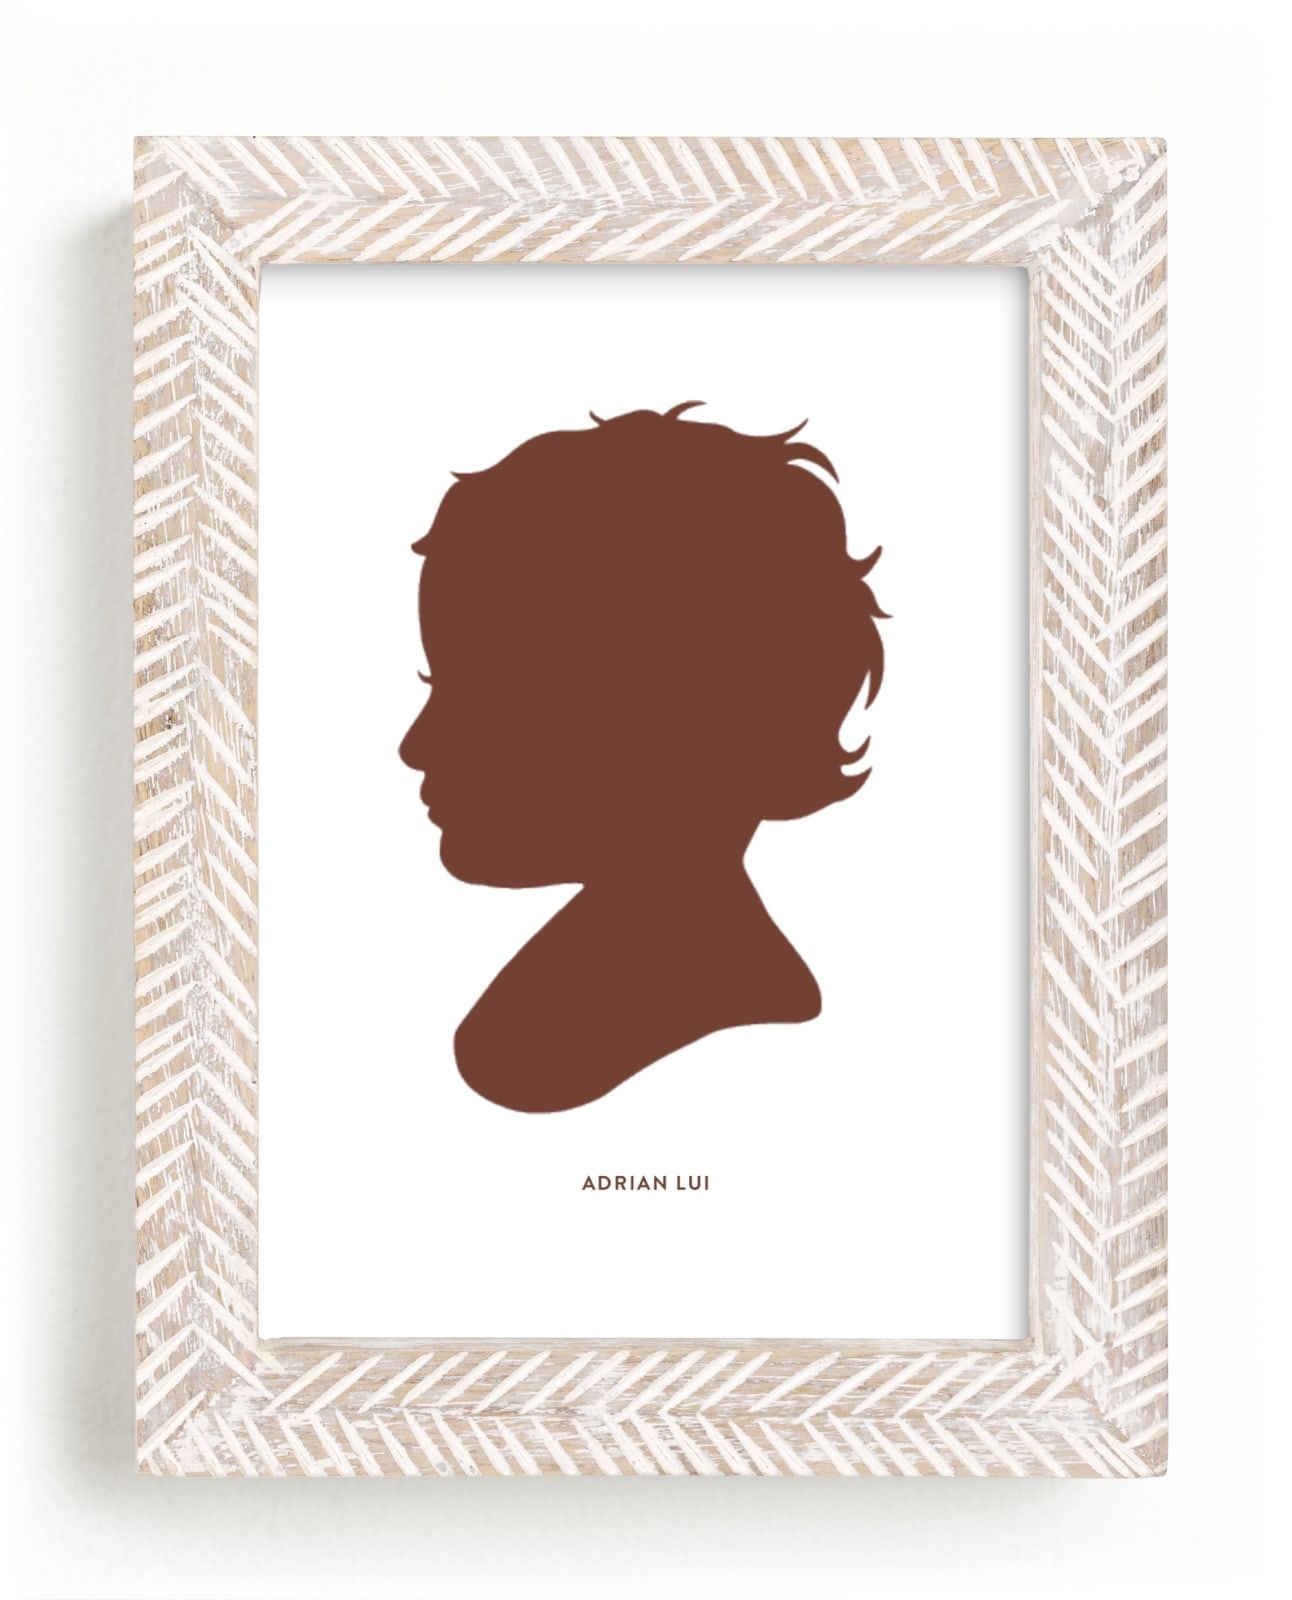 "Custom Silhouette Art" - Completely Custom Silhouette Art by Minted. | Minted